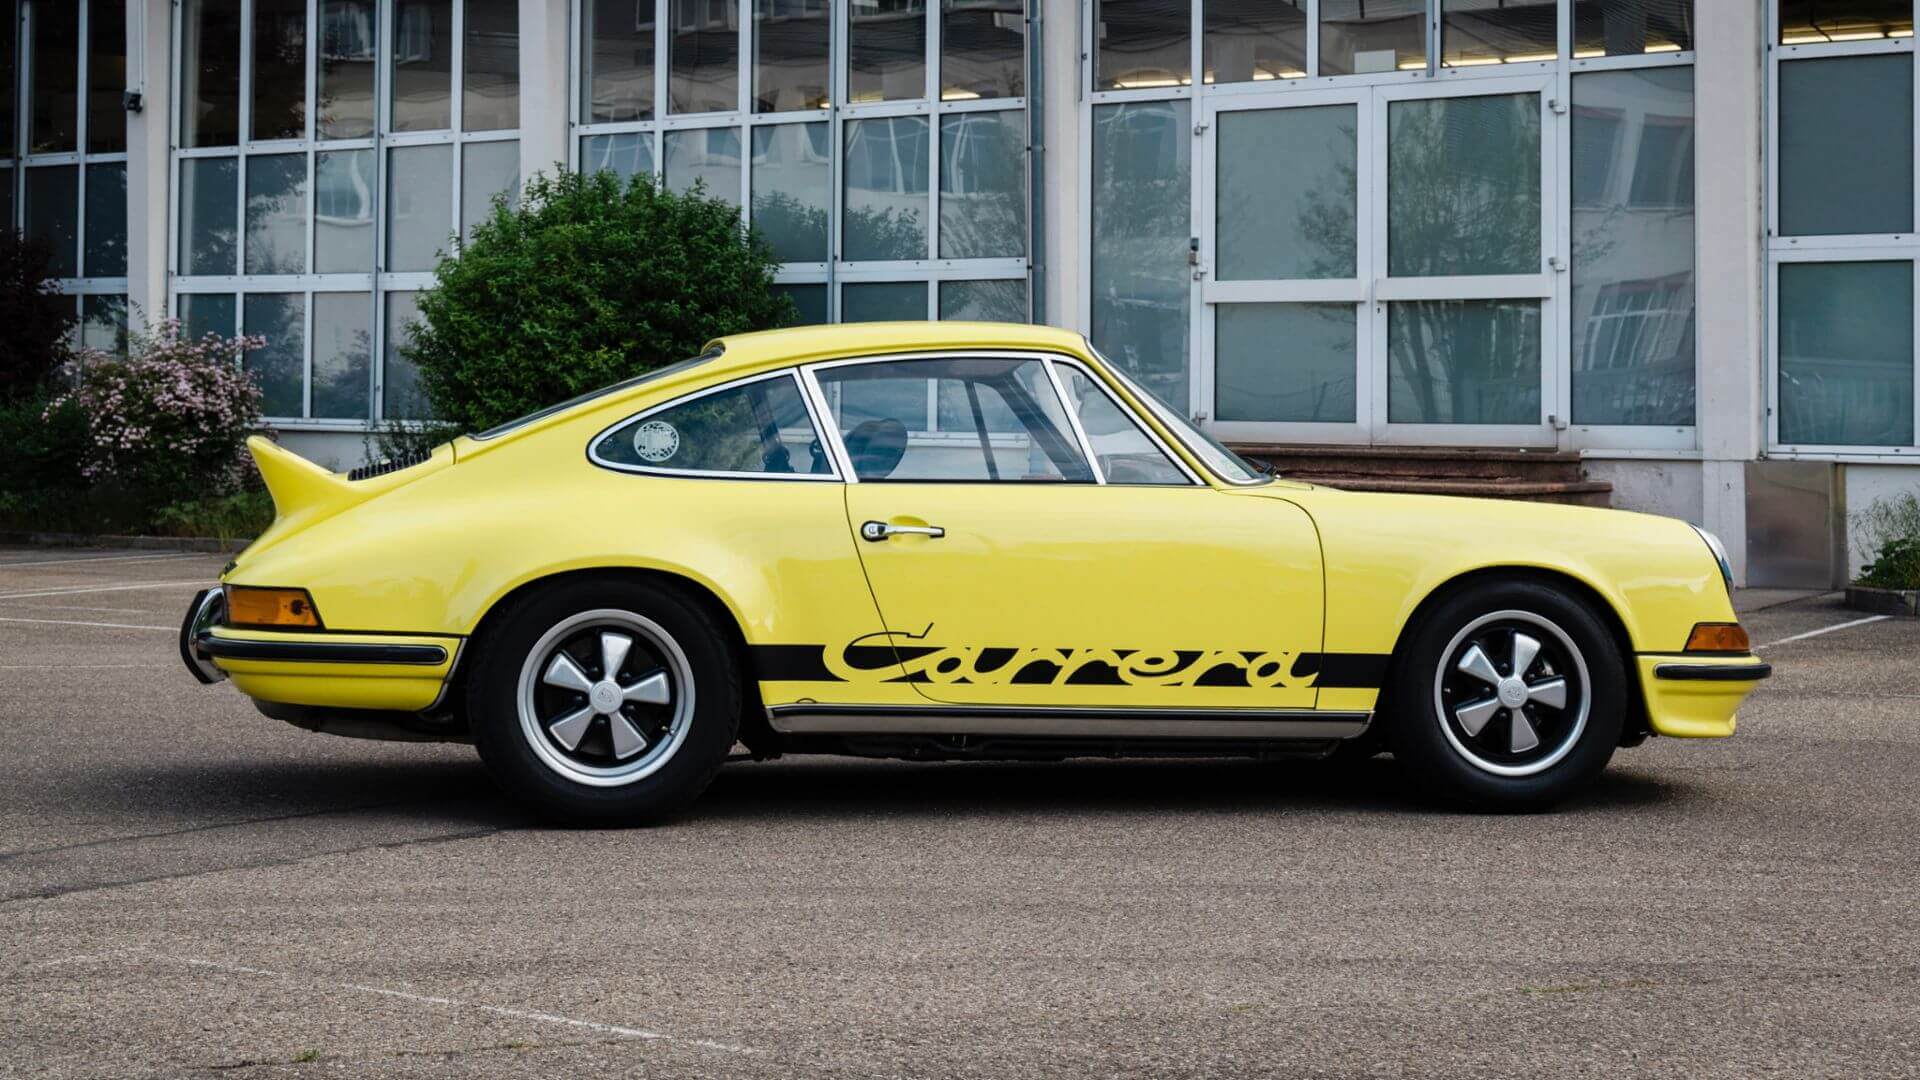 Porsche 911 Carrera RS 2.7: 50 years of incredible history